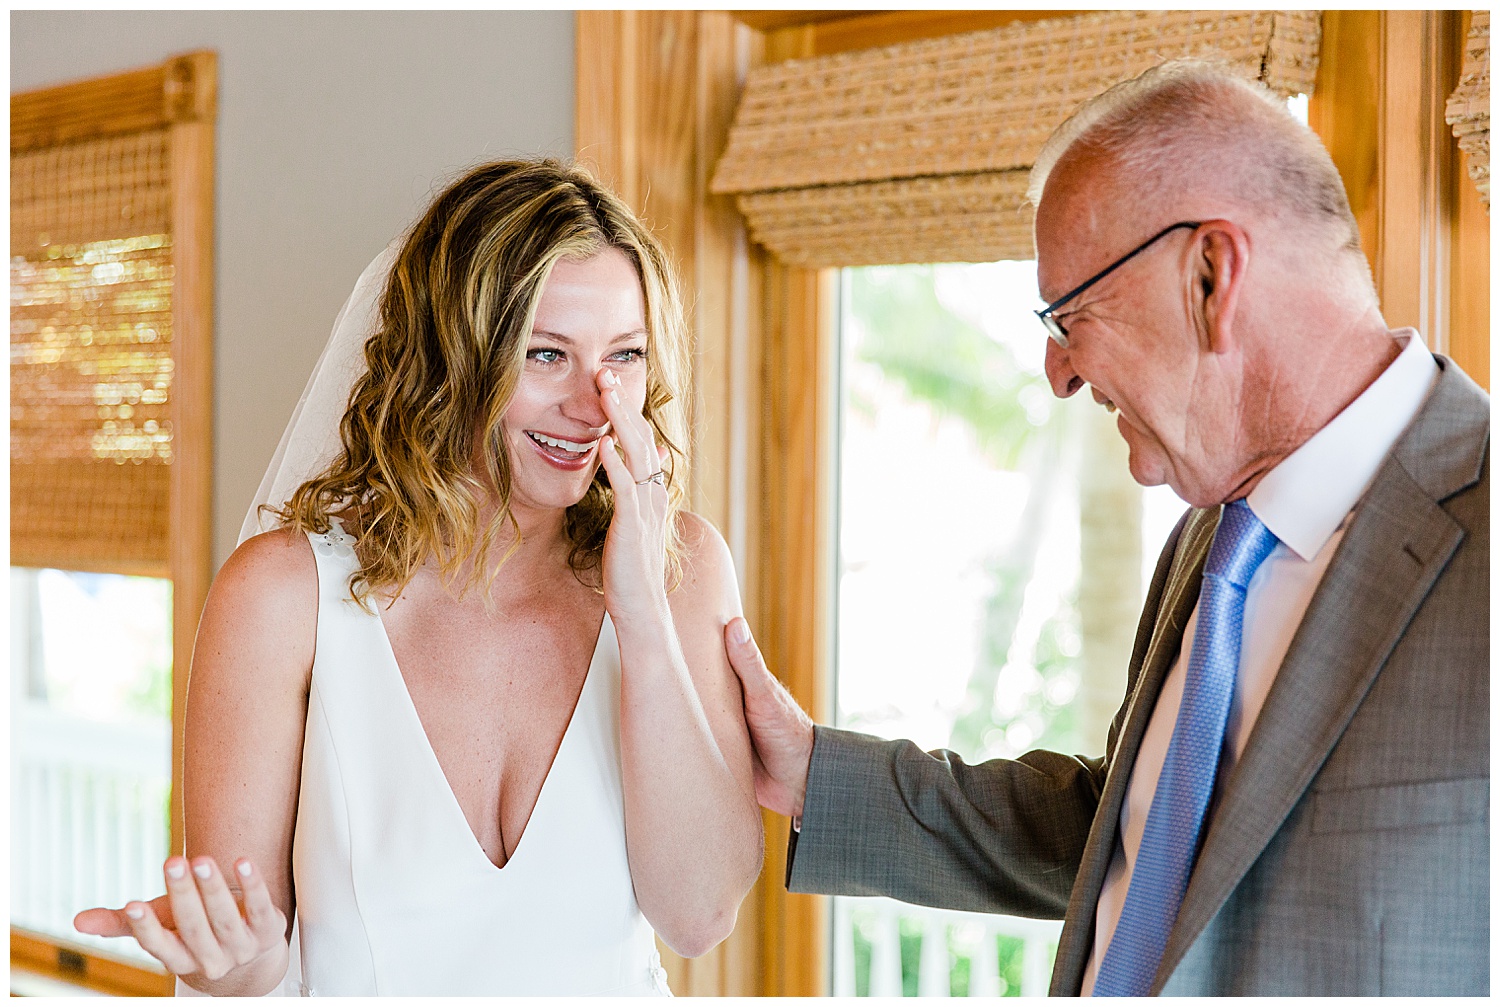 bride wiping tears after seeing father on her wedding day